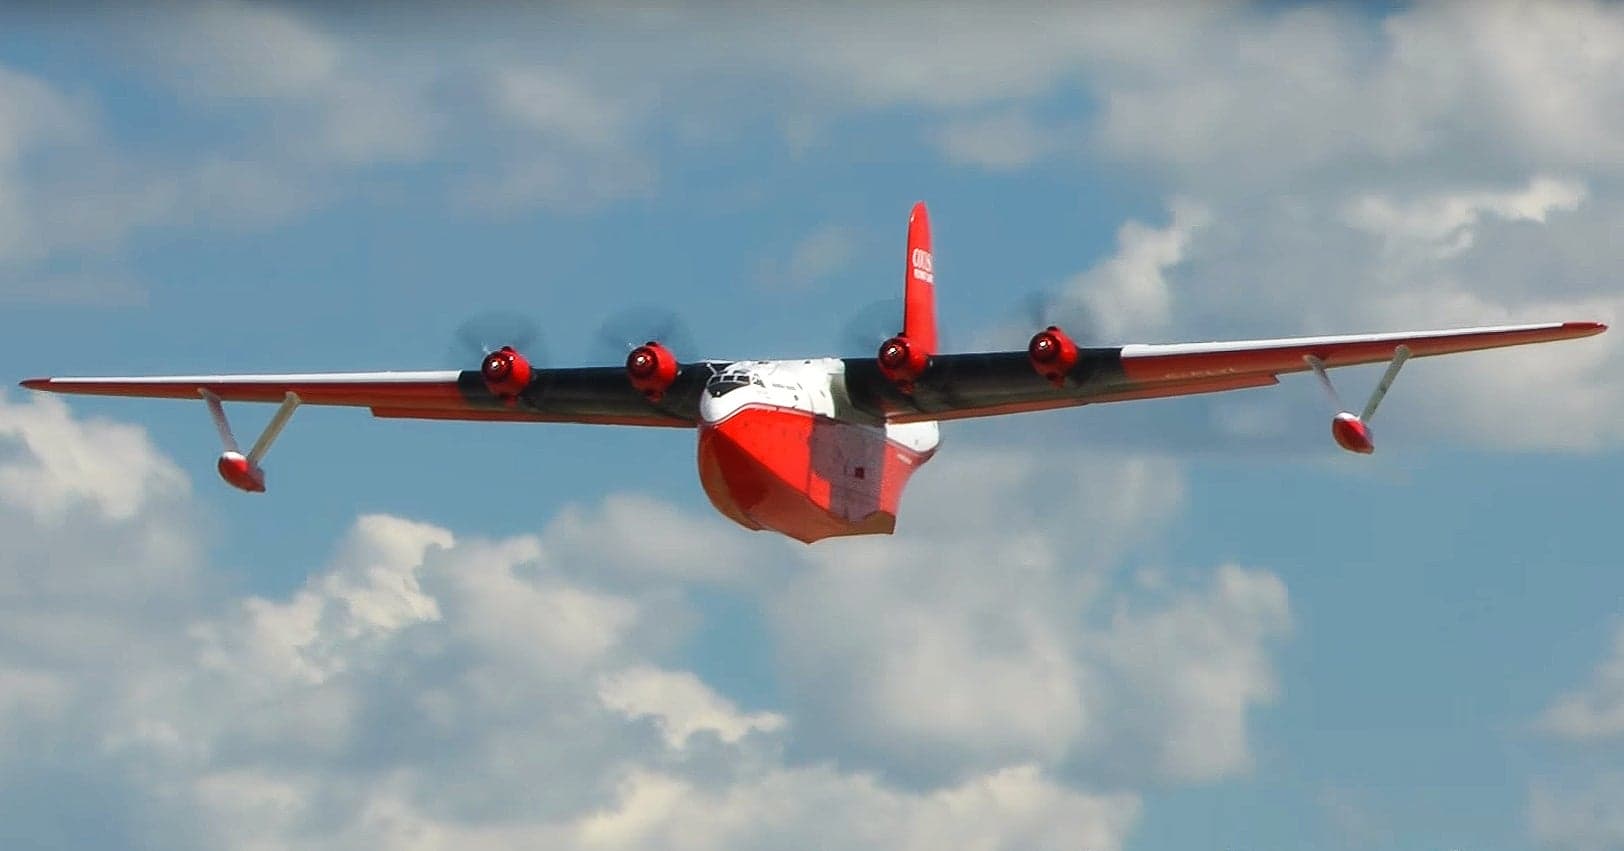 You Can Buy The World’s Largest Operational Flying Boat For About The Price Of A P-51 Mustang